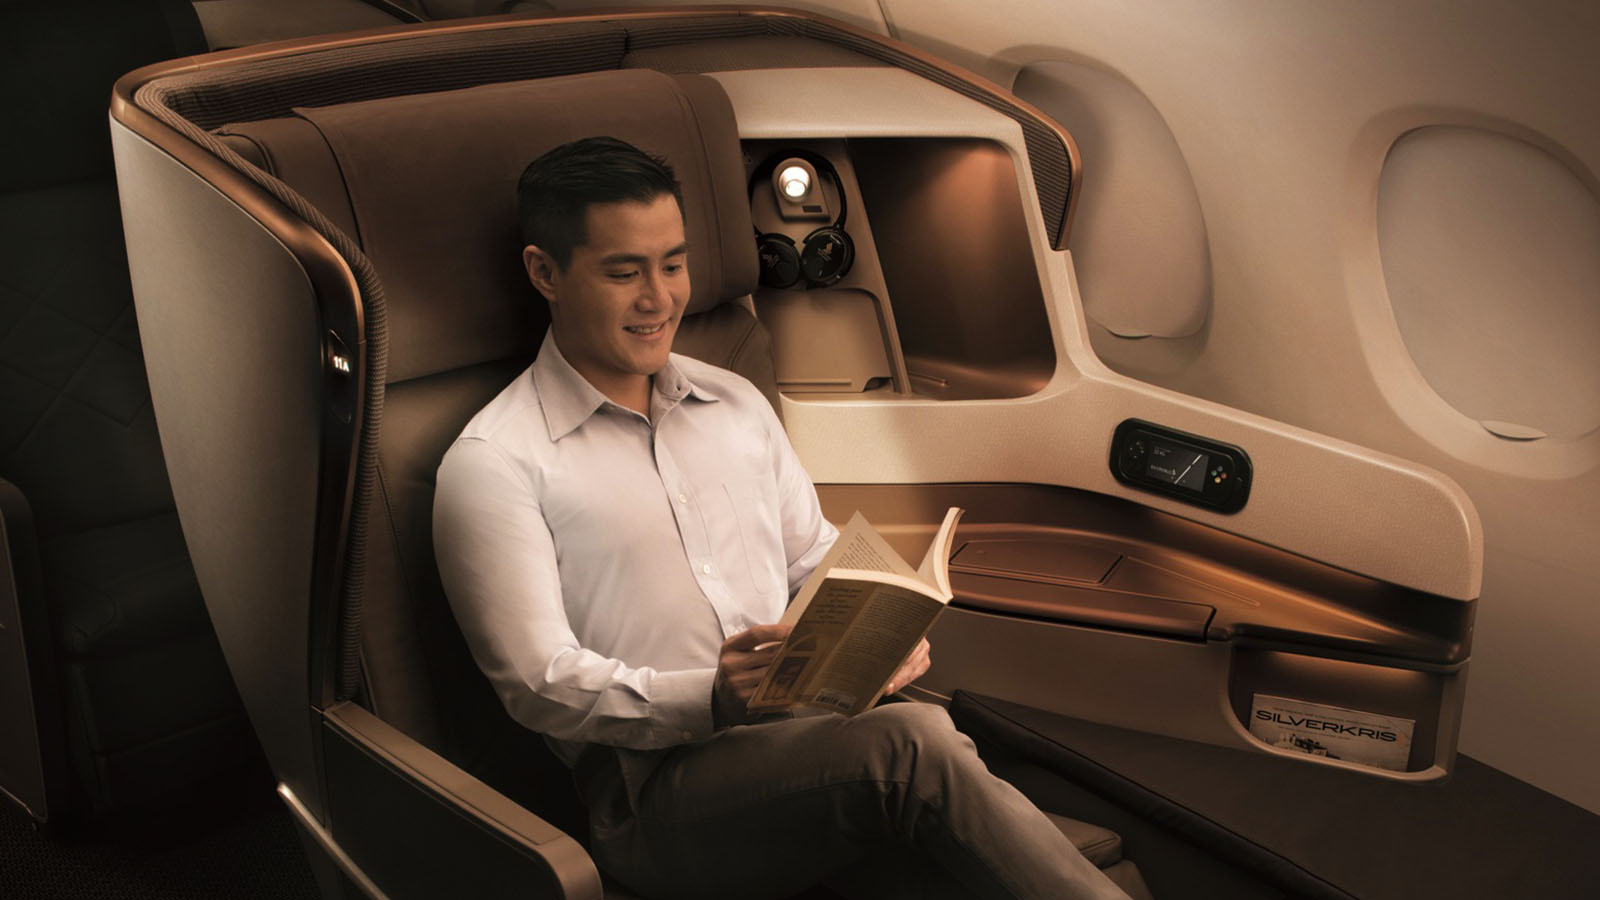 Singapore Airlines Airbus Business Class